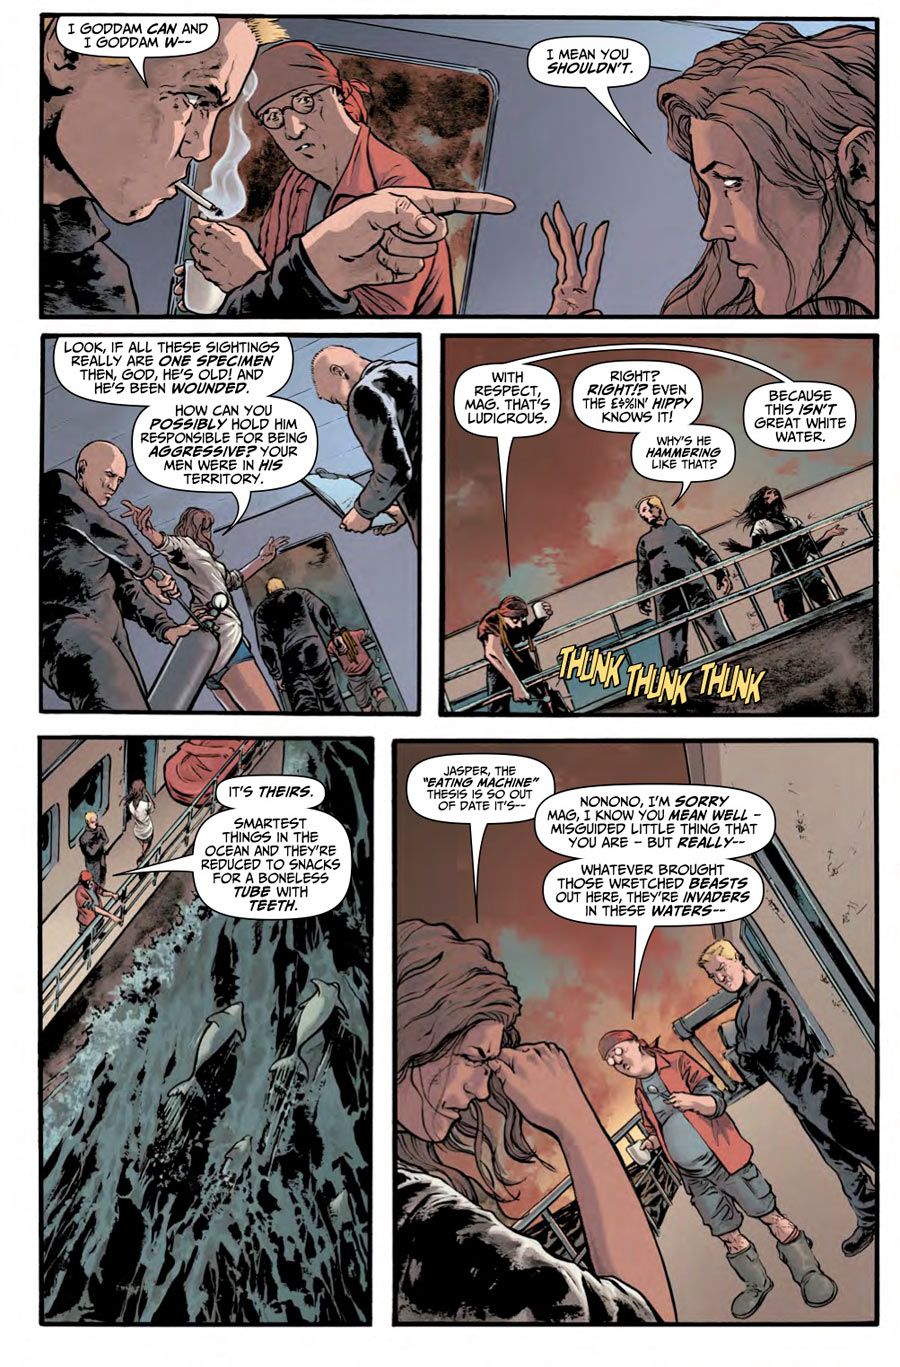 hook_jaw_2_preview-5